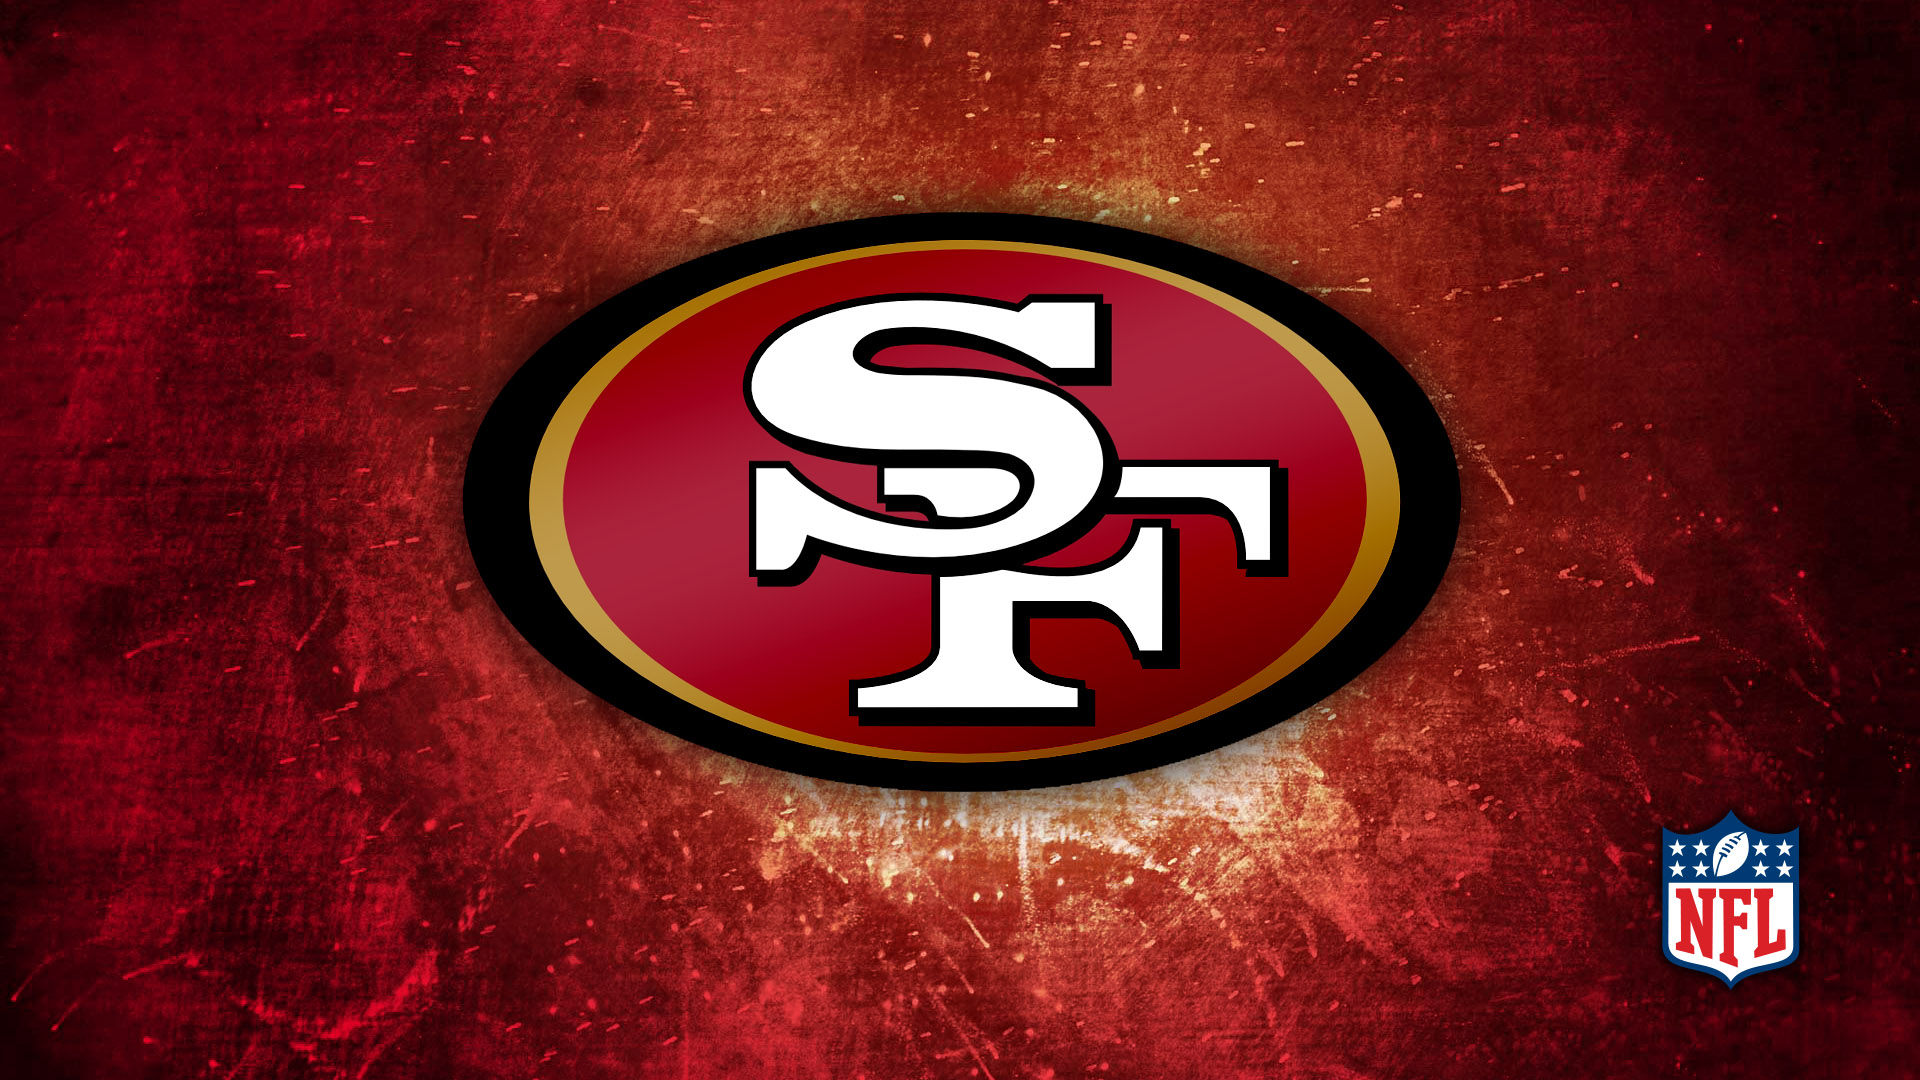 49ers Red Gold Logo 1920x1080 HD Image Sports NFL Football